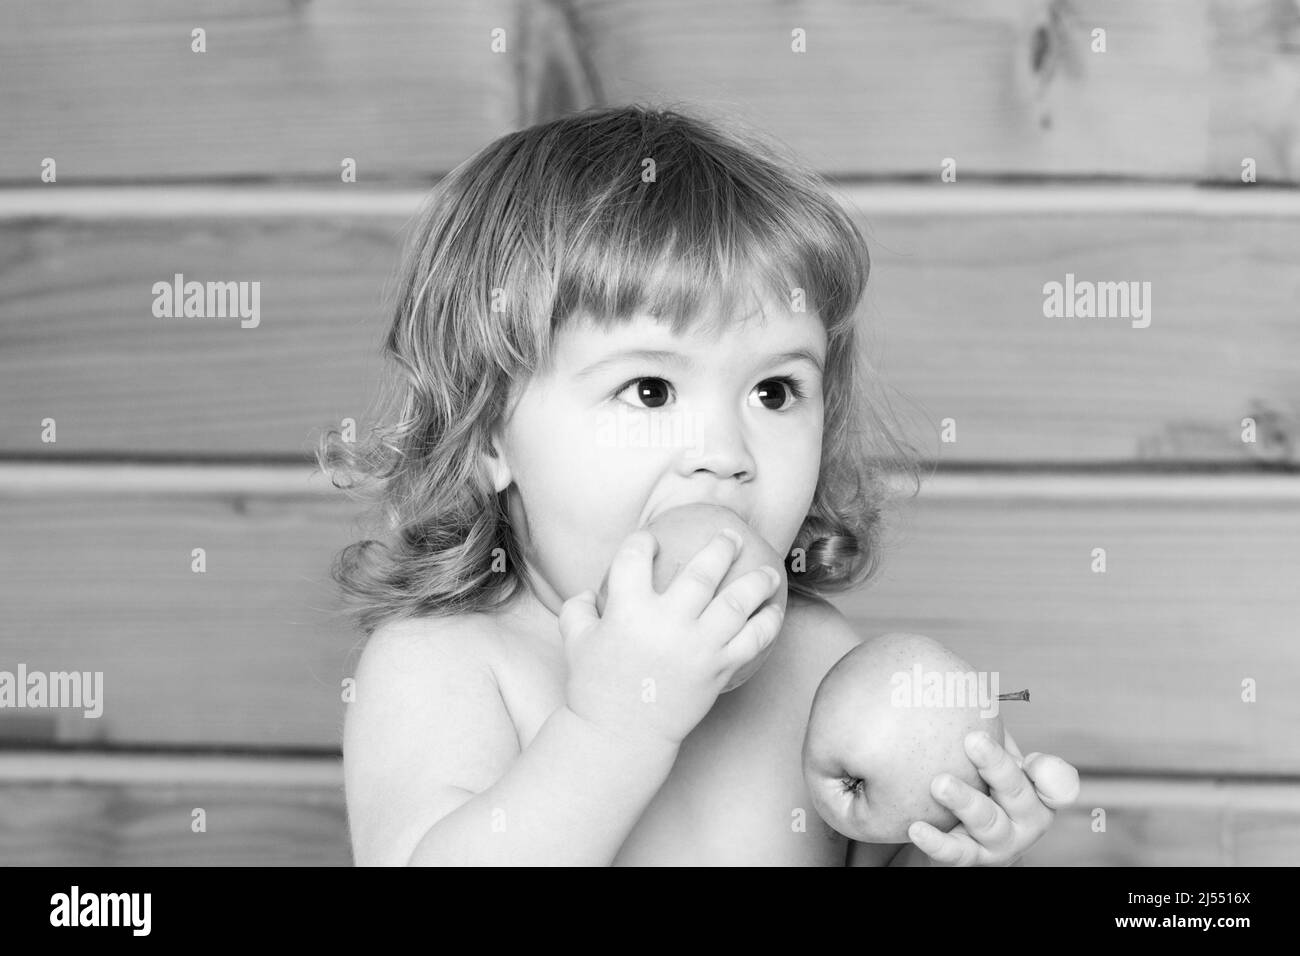 Hungry little baby boy eating apple. Kid with fresh fruit. Stock Photo